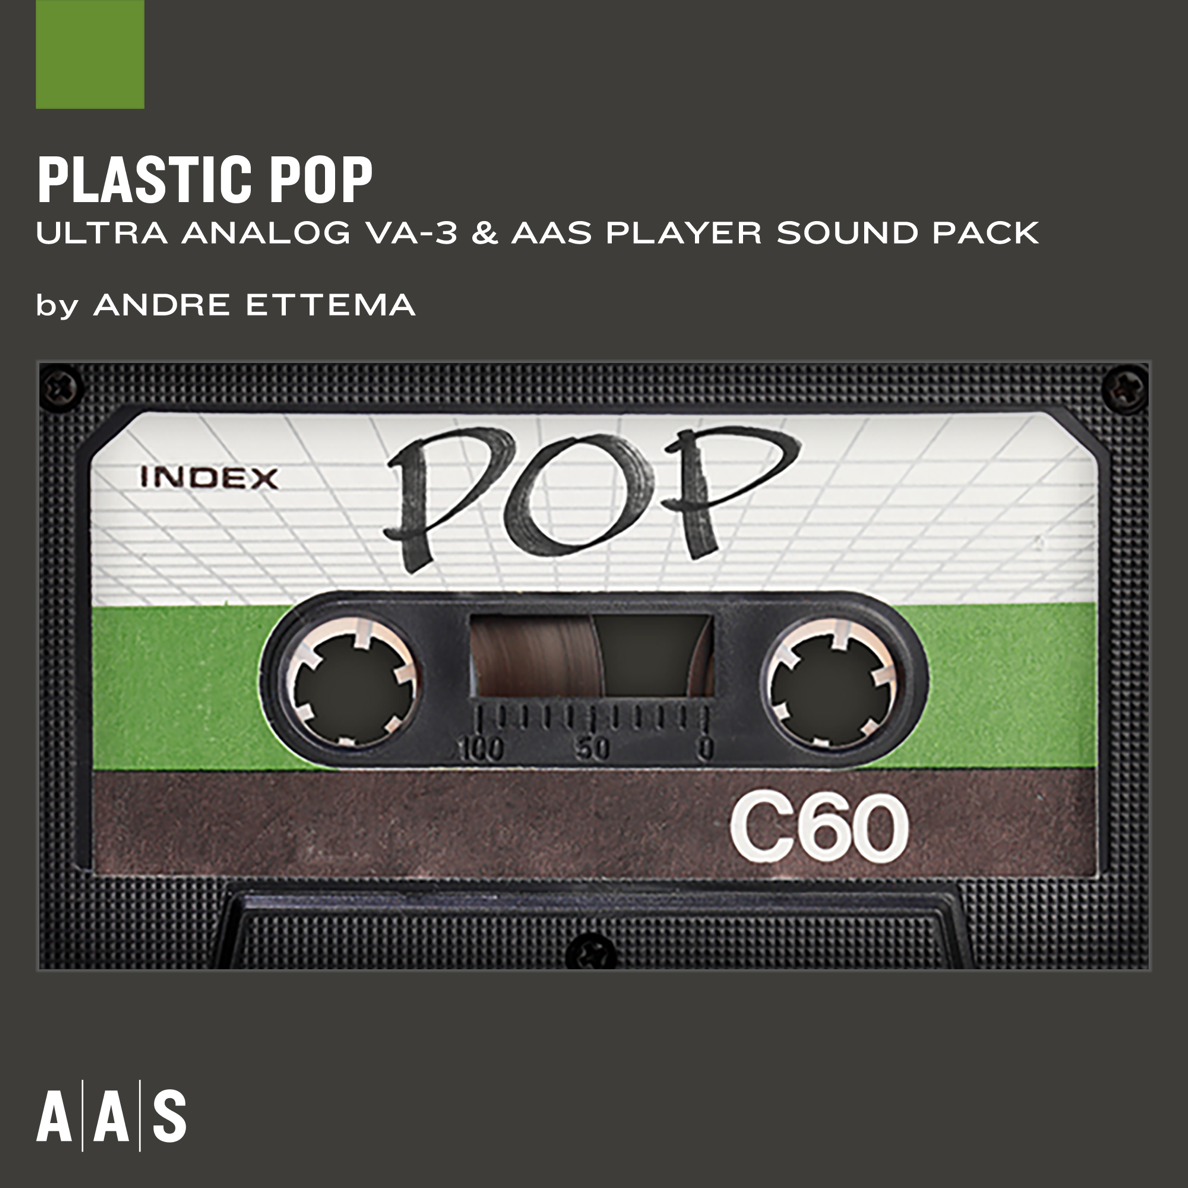 Ultra Analog and AAS Player sound pack ： Plastic POP